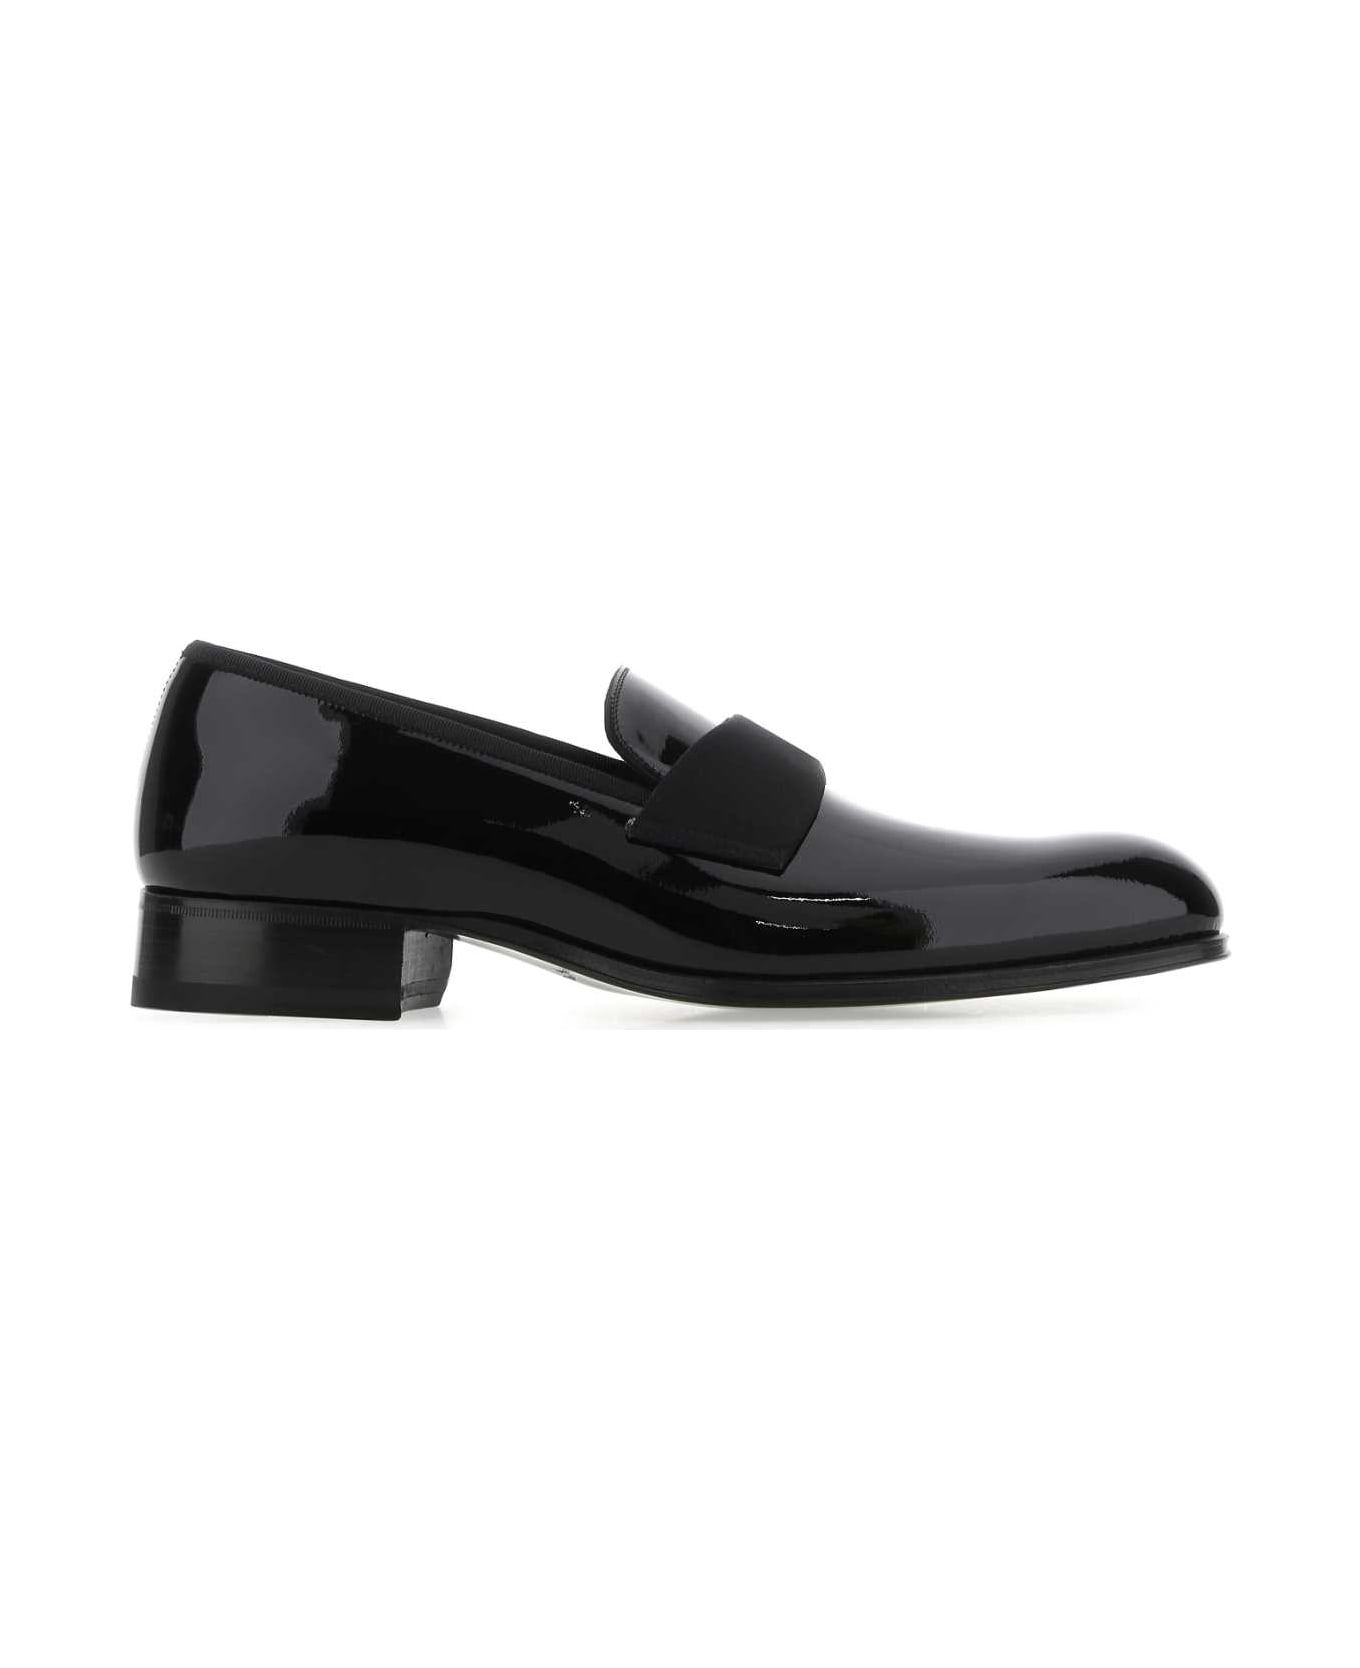 Tom Ford Black Leather Loafers - 1N001